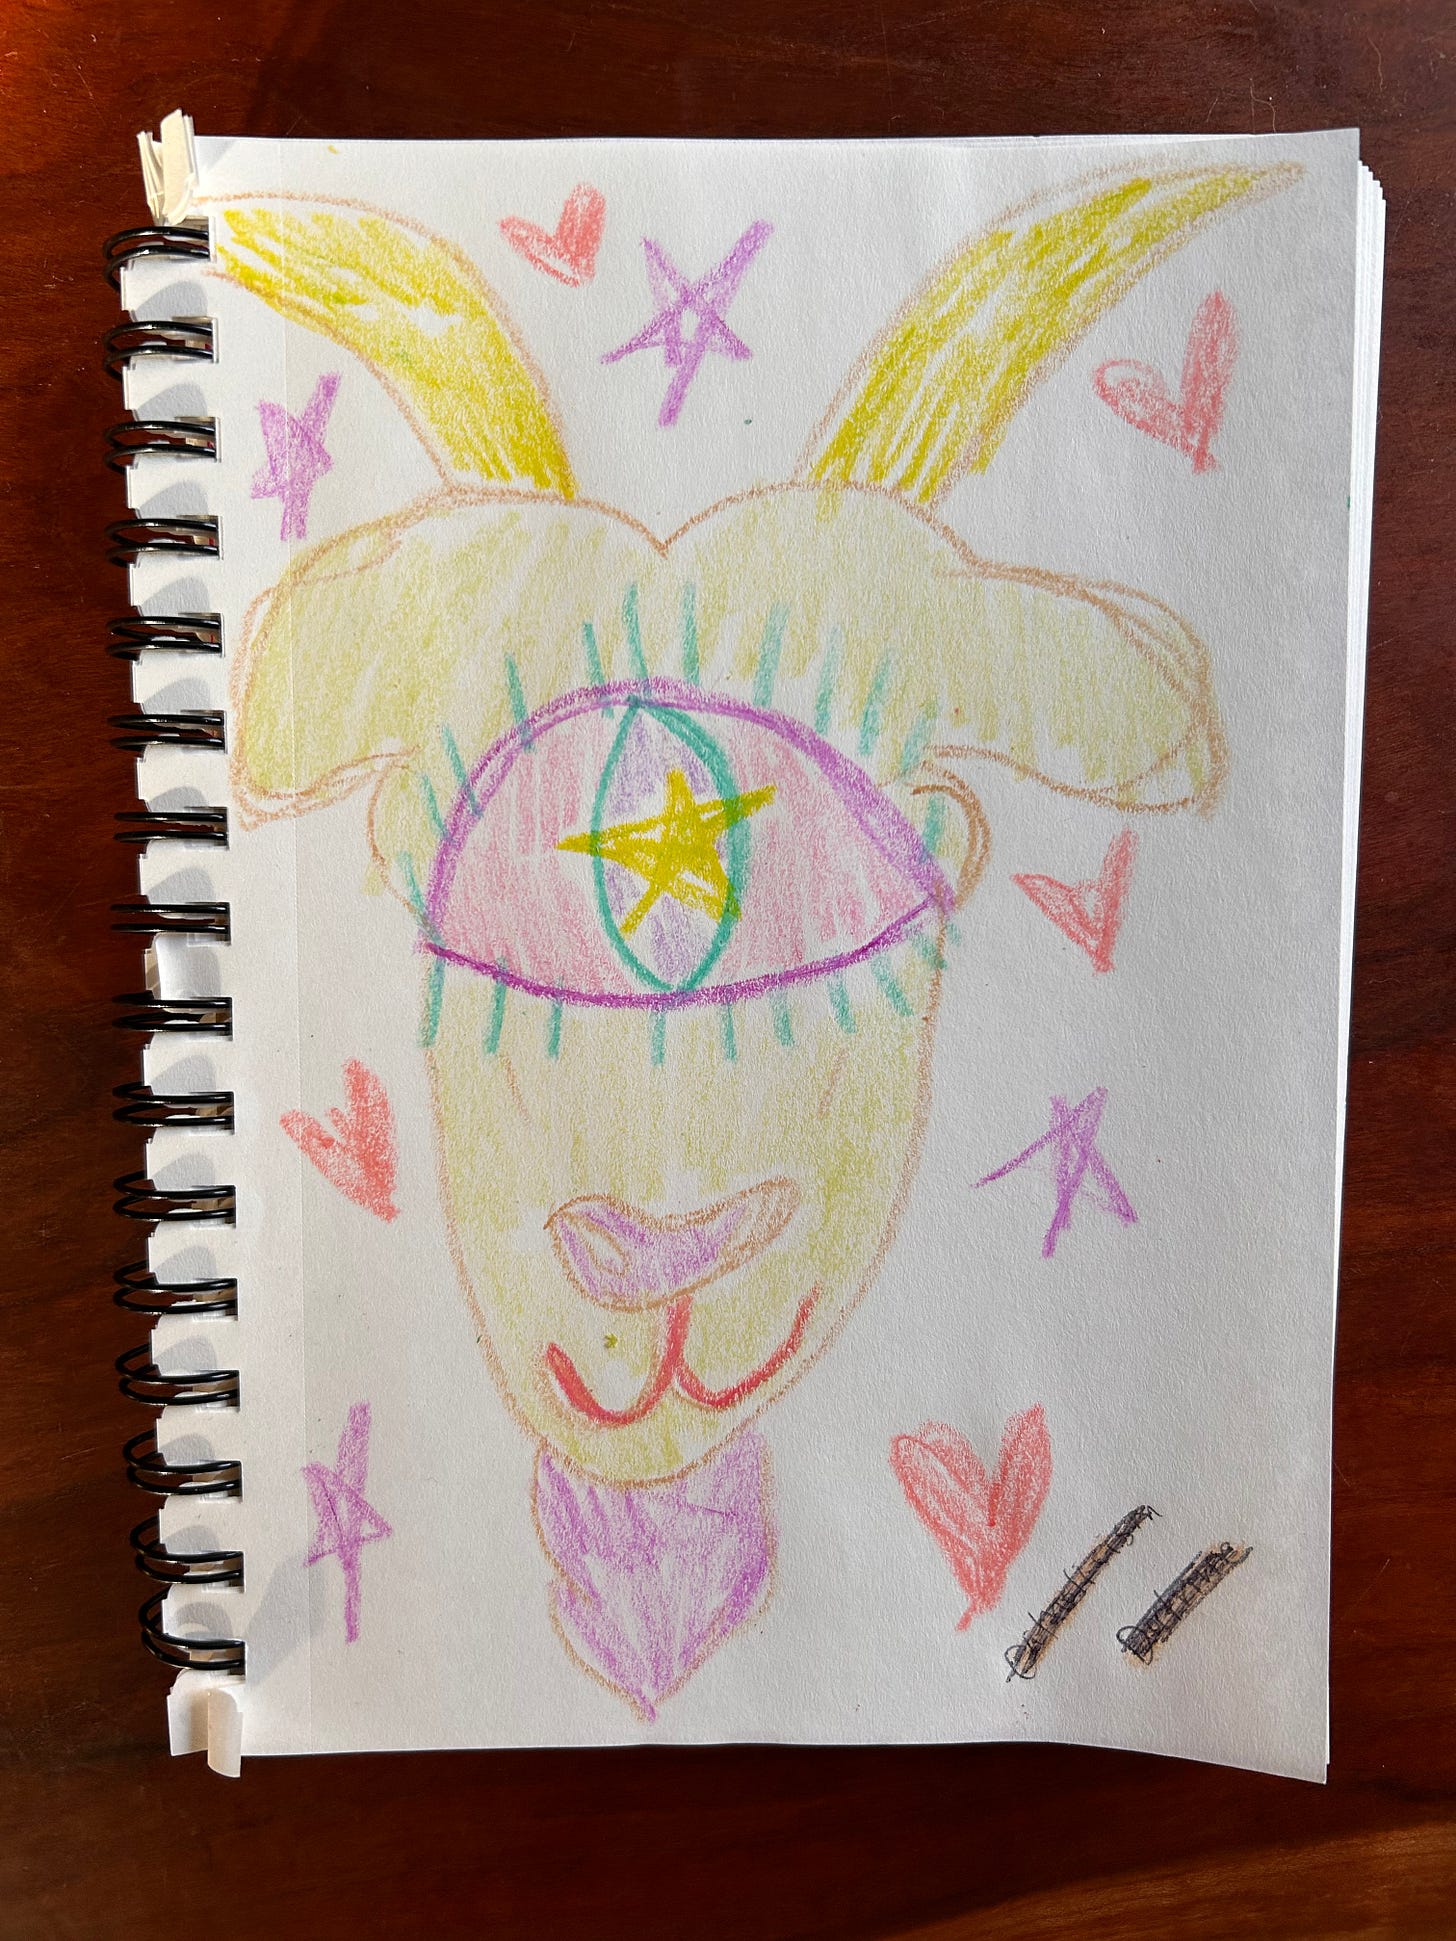 A crayon drawing of a goat surrounded by hearts and stars. In the center of the goat's head is one big eyeball, with a star in the middle.